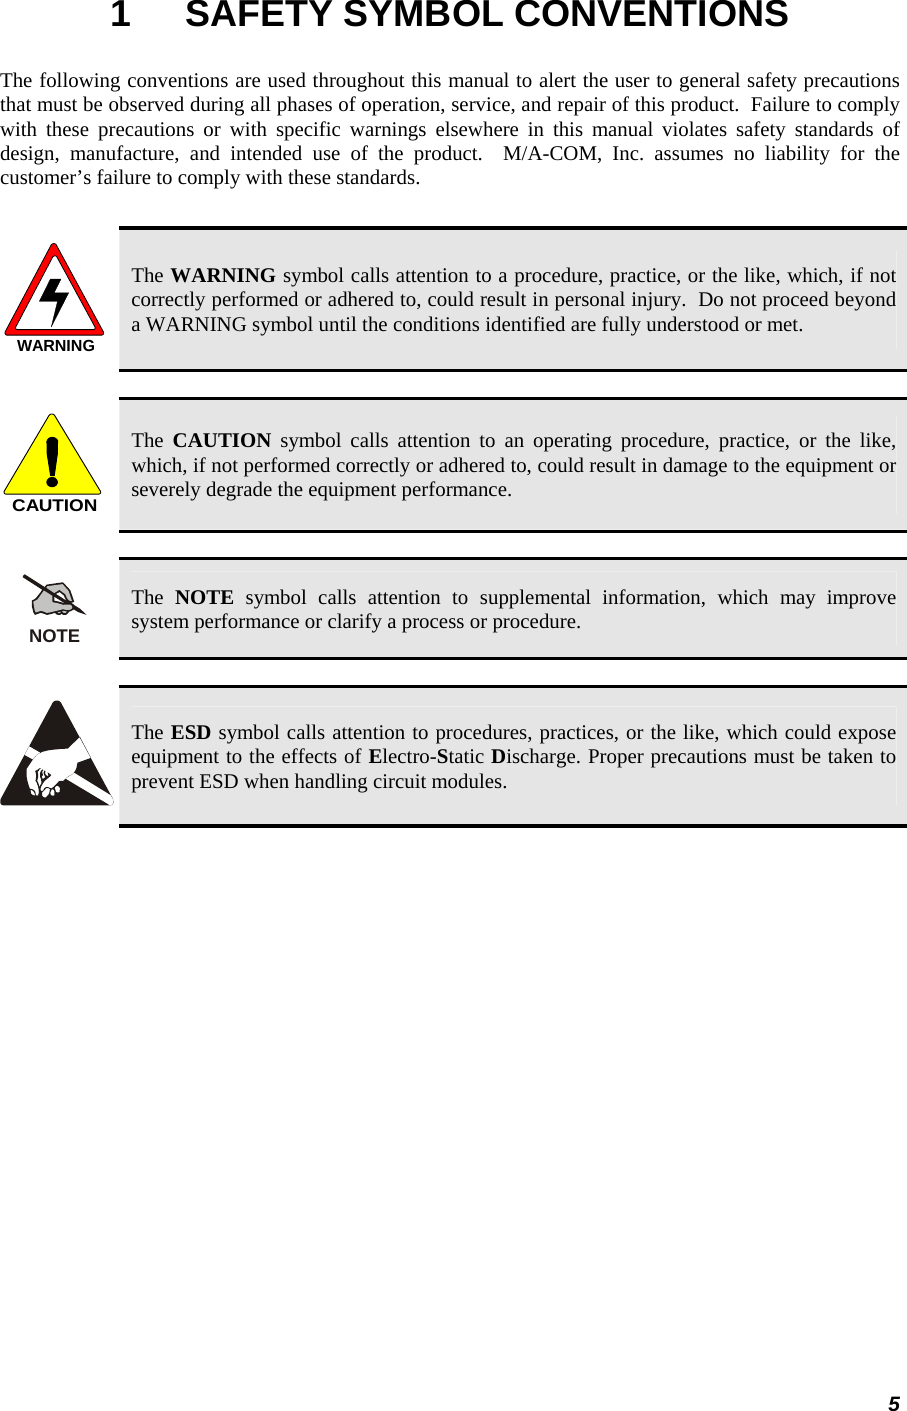 5 1  SAFETY SYMBOL CONVENTIONS The following conventions are used throughout this manual to alert the user to general safety precautions that must be observed during all phases of operation, service, and repair of this product.  Failure to comply with these precautions or with specific warnings elsewhere in this manual violates safety standards of design, manufacture, and intended use of the product.  M/A-COM, Inc. assumes no liability for the customer’s failure to comply with these standards.  WARNING The WARNING symbol calls attention to a procedure, practice, or the like, which, if not correctly performed or adhered to, could result in personal injury.  Do not proceed beyond a WARNING symbol until the conditions identified are fully understood or met.   CAUTION The  CAUTION symbol calls attention to an operating procedure, practice, or the like, which, if not performed correctly or adhered to, could result in damage to the equipment or severely degrade the equipment performance.   NOTE The  NOTE symbol calls attention to supplemental information, which may improve system performance or clarify a process or procedure.    The ESD symbol calls attention to procedures, practices, or the like, which could expose equipment to the effects of Electro-Static Discharge. Proper precautions must be taken to prevent ESD when handling circuit modules.  